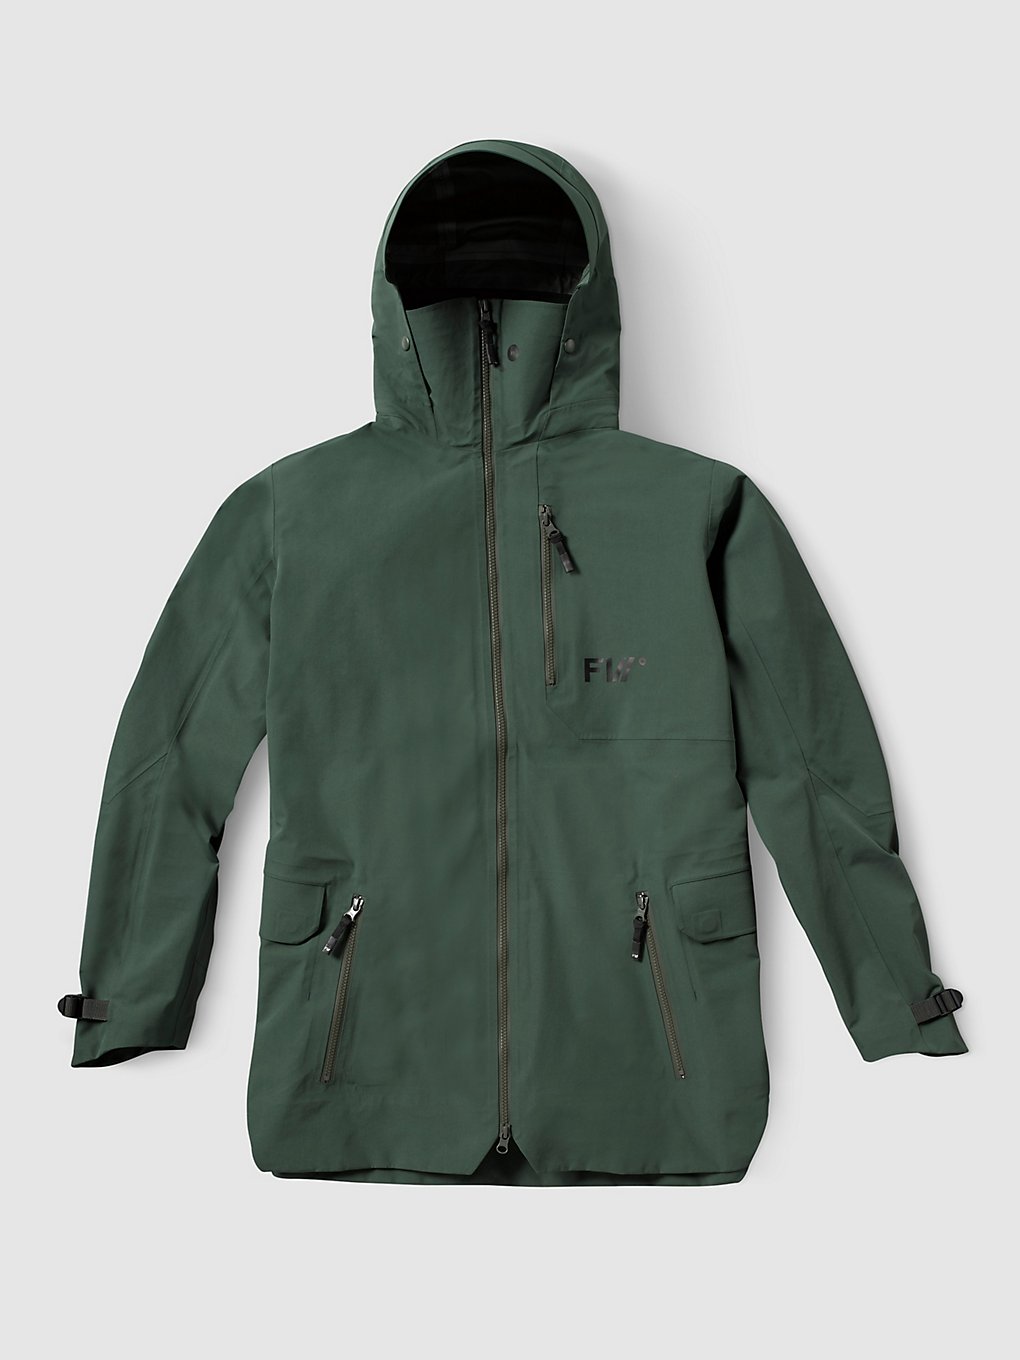 FW Root 3L Jacket deep forest